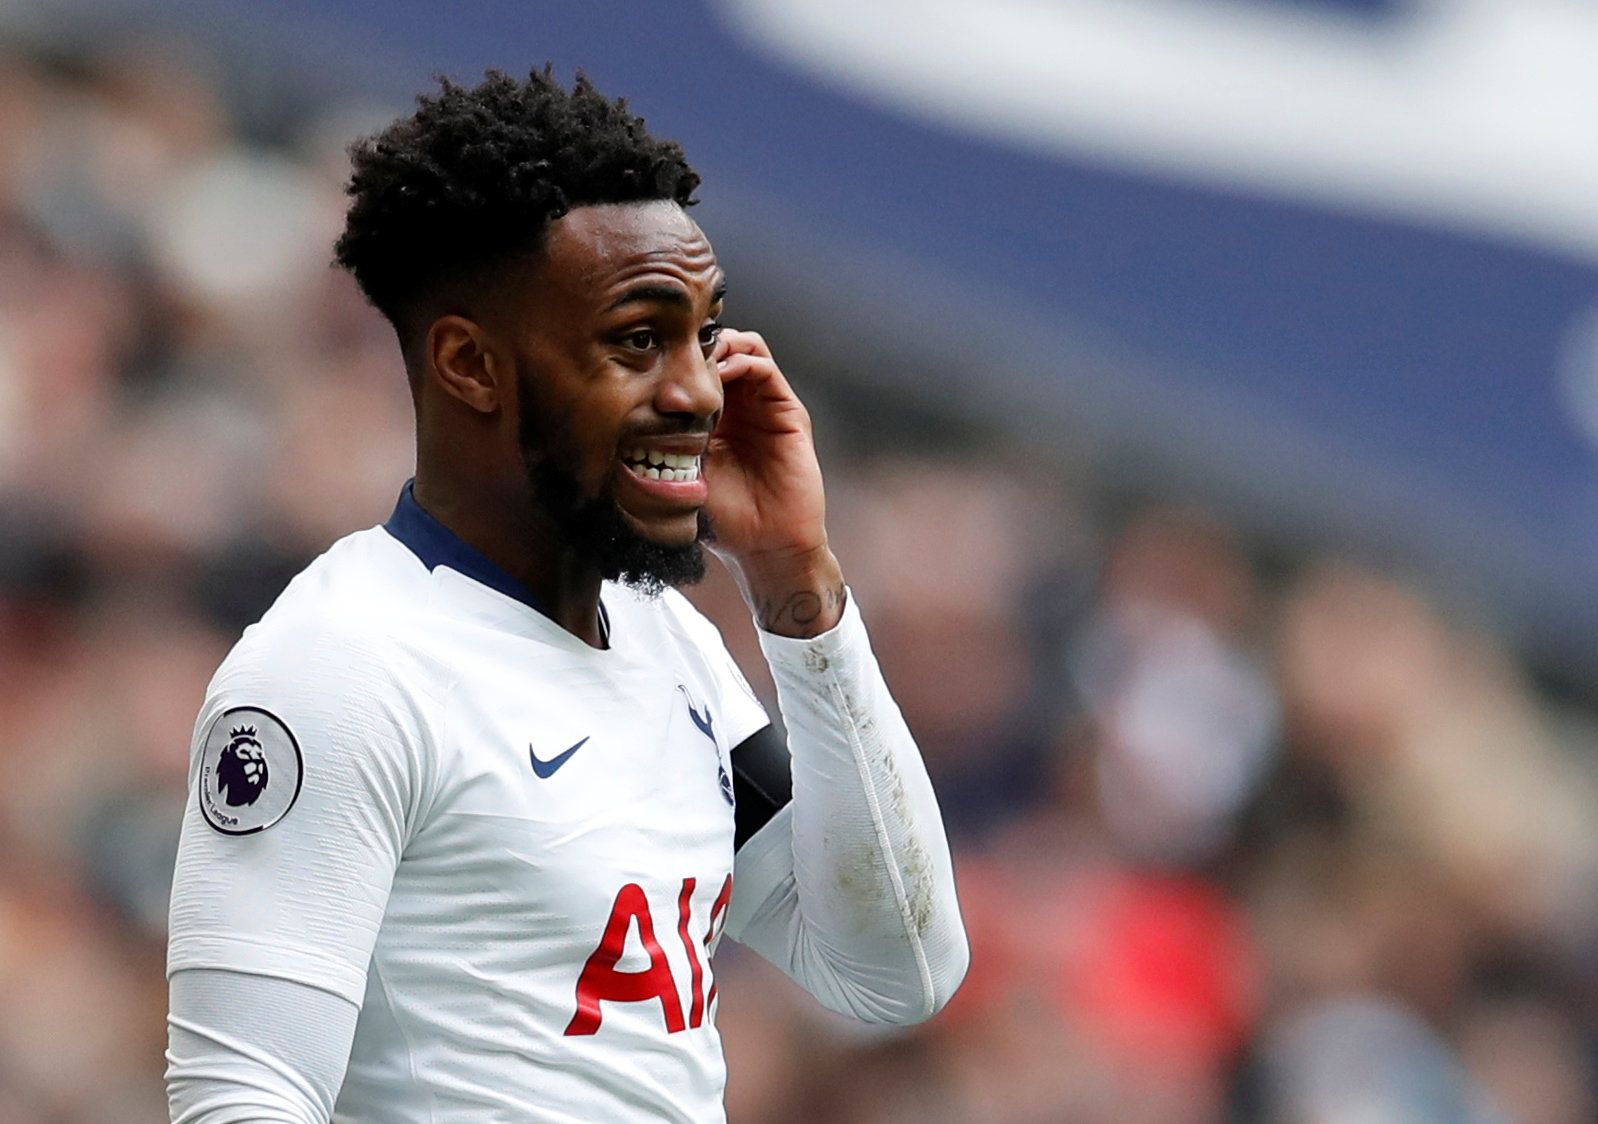 Soccer Football - Premier League - Tottenham Hotspur v Leicester City - Wembley Stadium, London, Britain - February 10, 2019  Tottenham's Danny Rose   REUTERS/David Klein  EDITORIAL USE ONLY. No use with unauthorized audio, video, data, fixture lists, club/league logos or 